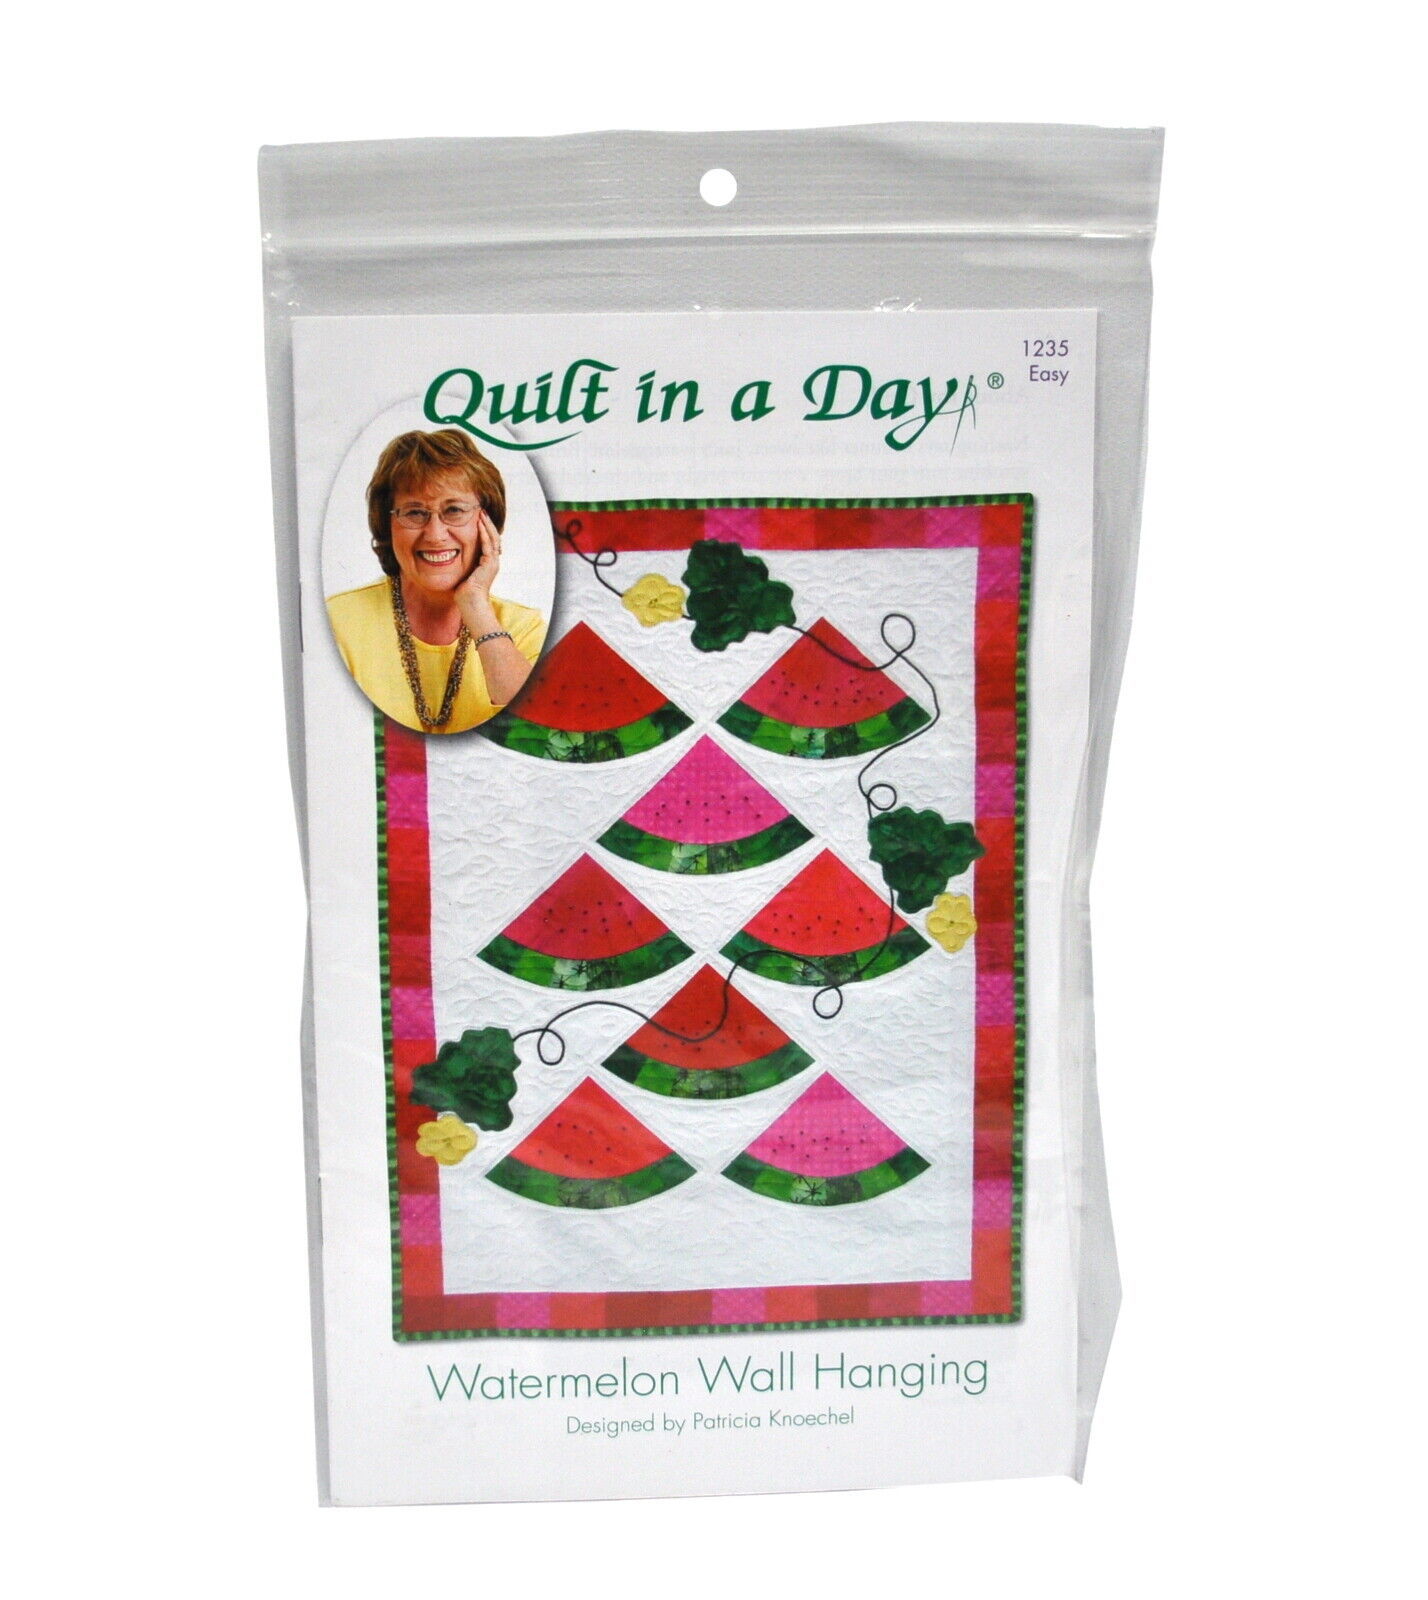 Quilt In A Day Watermelon Wall Hanging Kit - $5.95